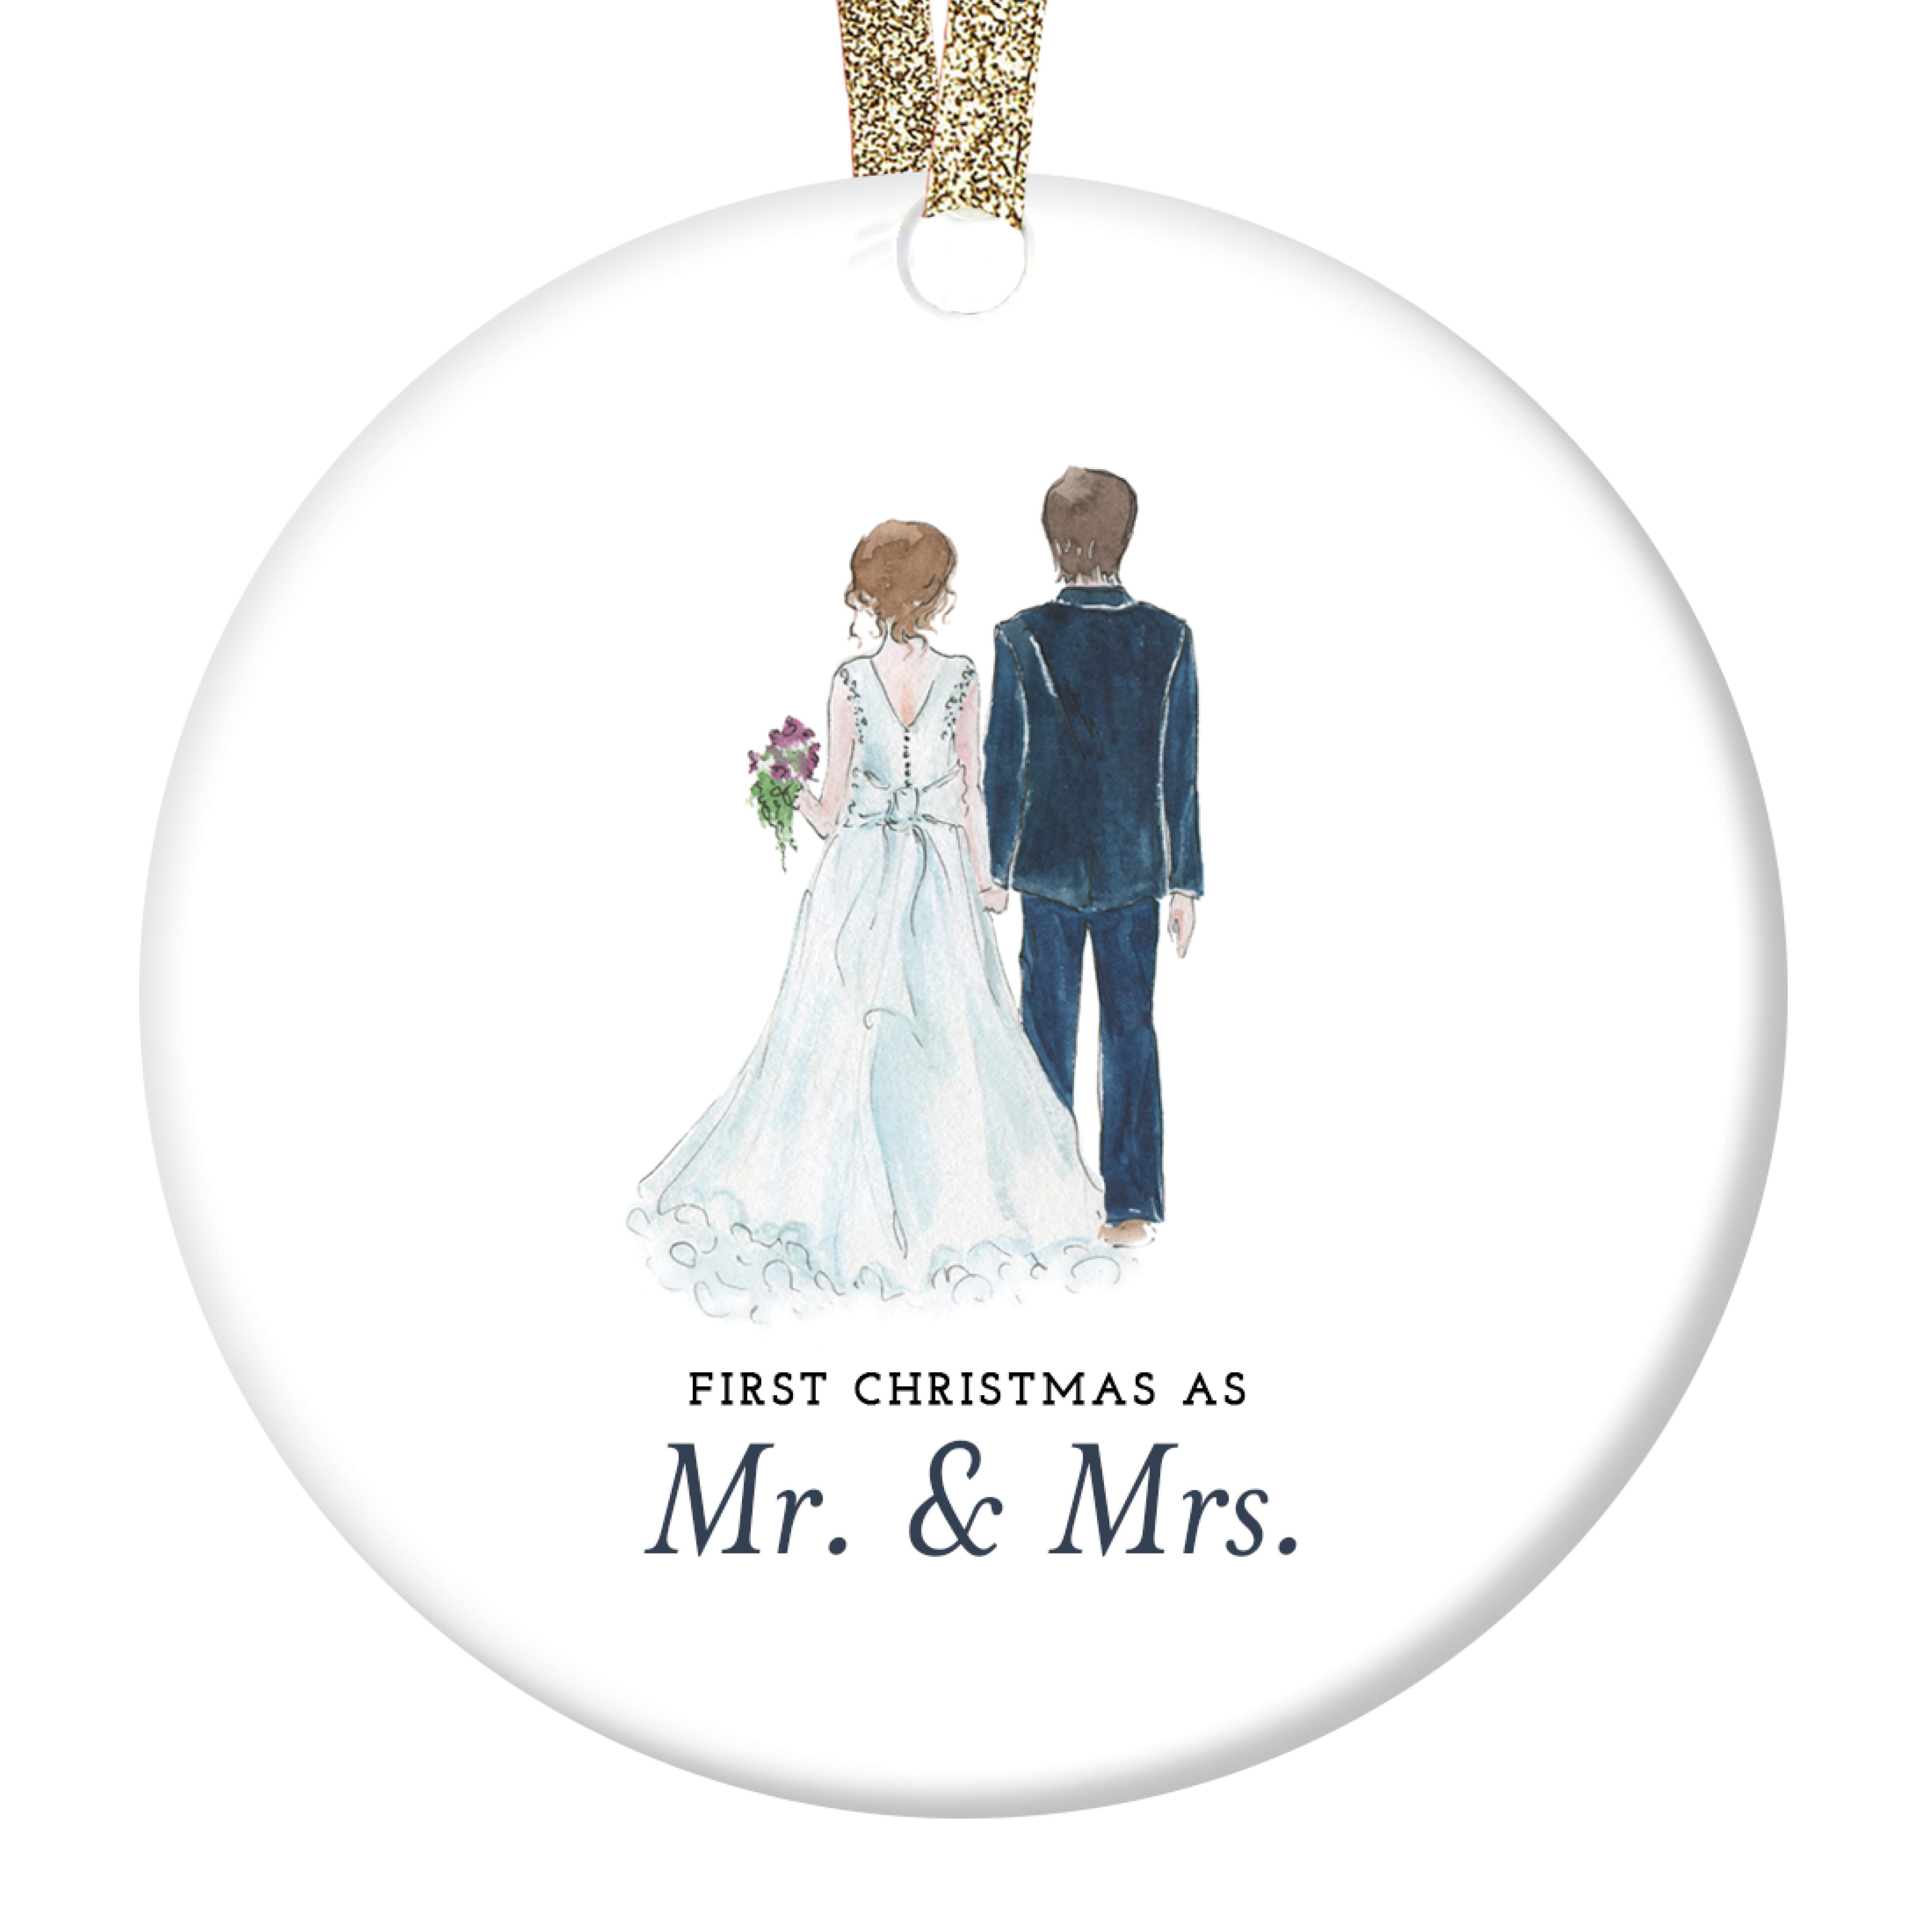 1st Christmas Married Modern Farmhouse Mr & Mrs Ornament 2019 wood slice ornament 3 First Gift for Newlywed Couple Bride Groom Rustic Present Keepsake Present